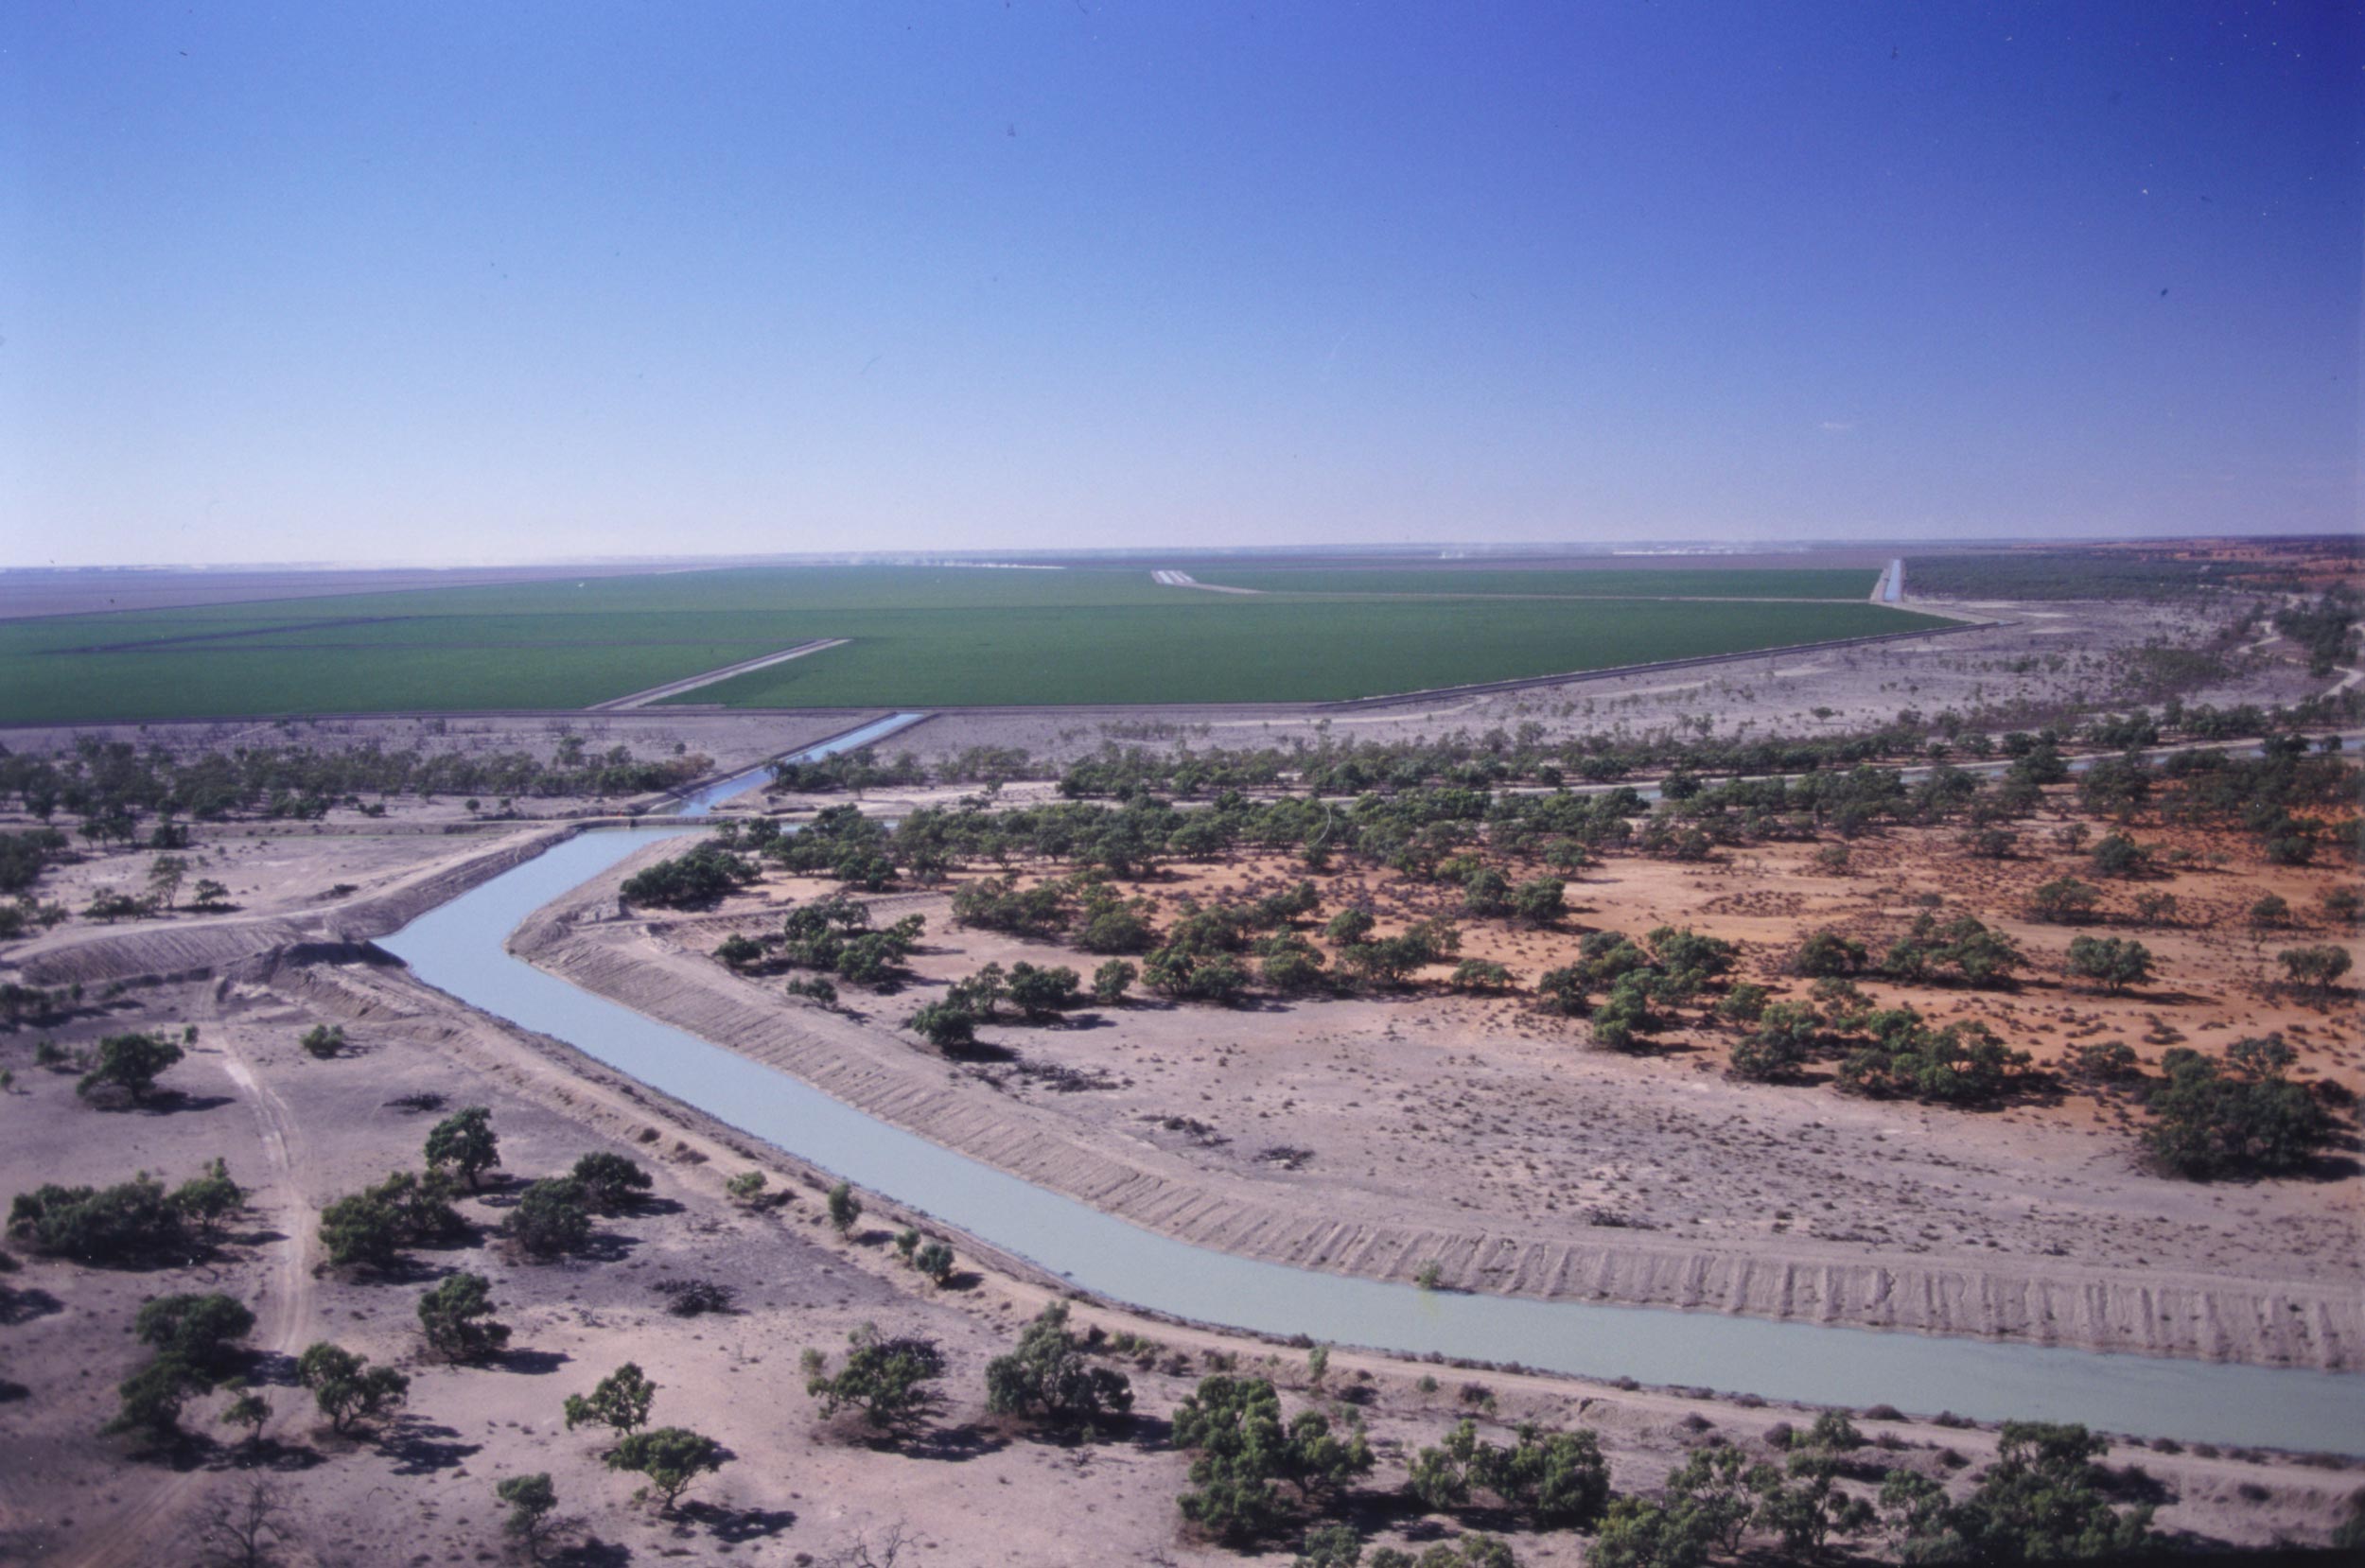 Irrigation canal and cotton fields at Tandou farm, Menindee, New South Wales, about 1995.